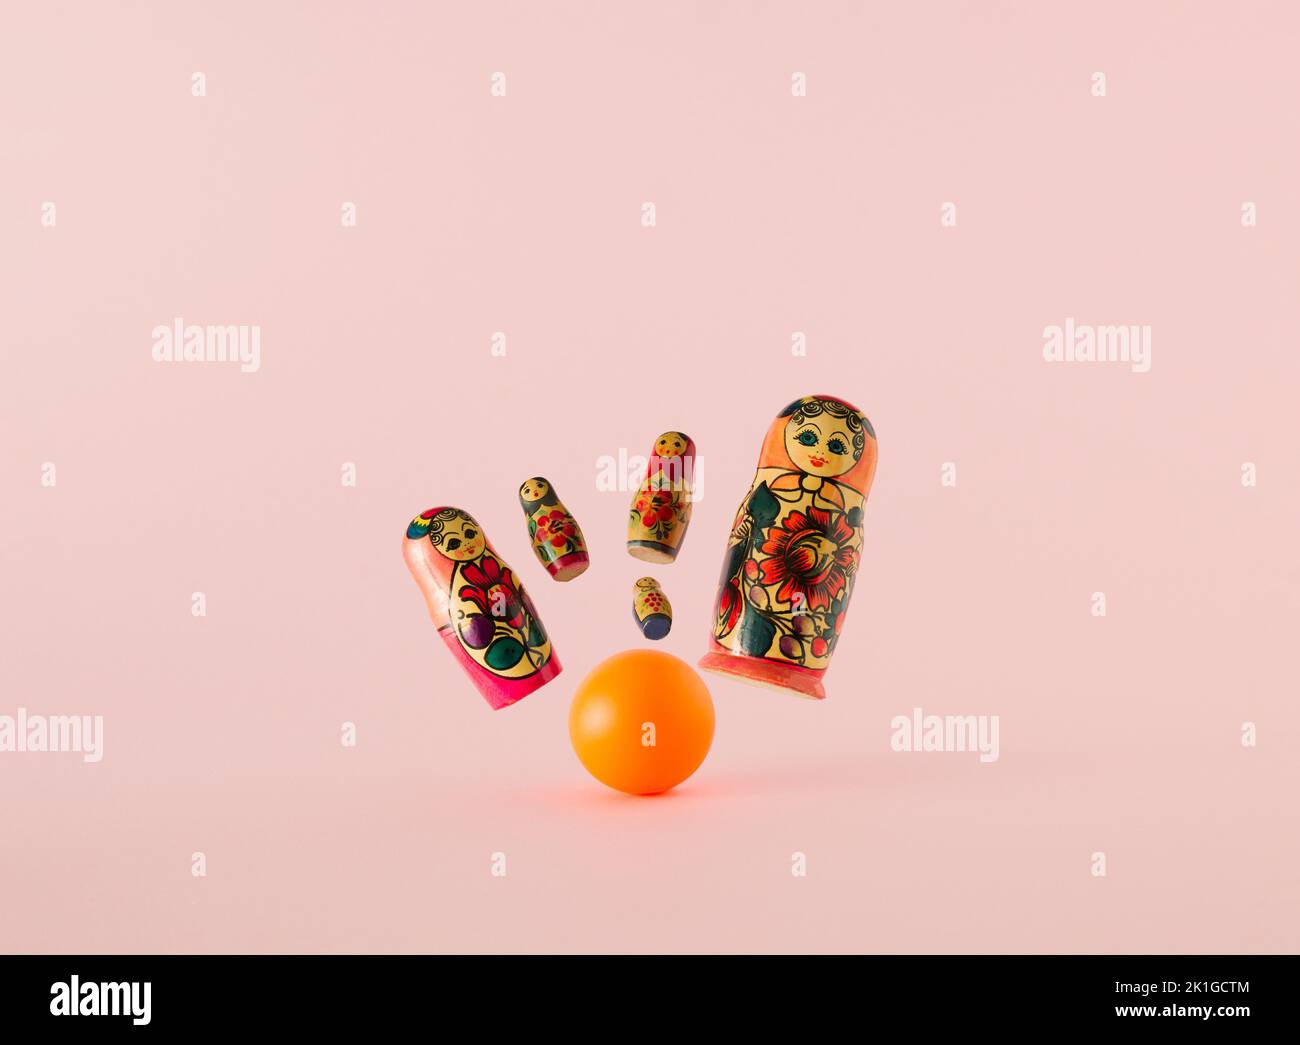 Russian dolls known as matryoshka or babushka as the pins flying from the strike of the orange bowling ball on a pink background. Minimal concept. Stock Photo